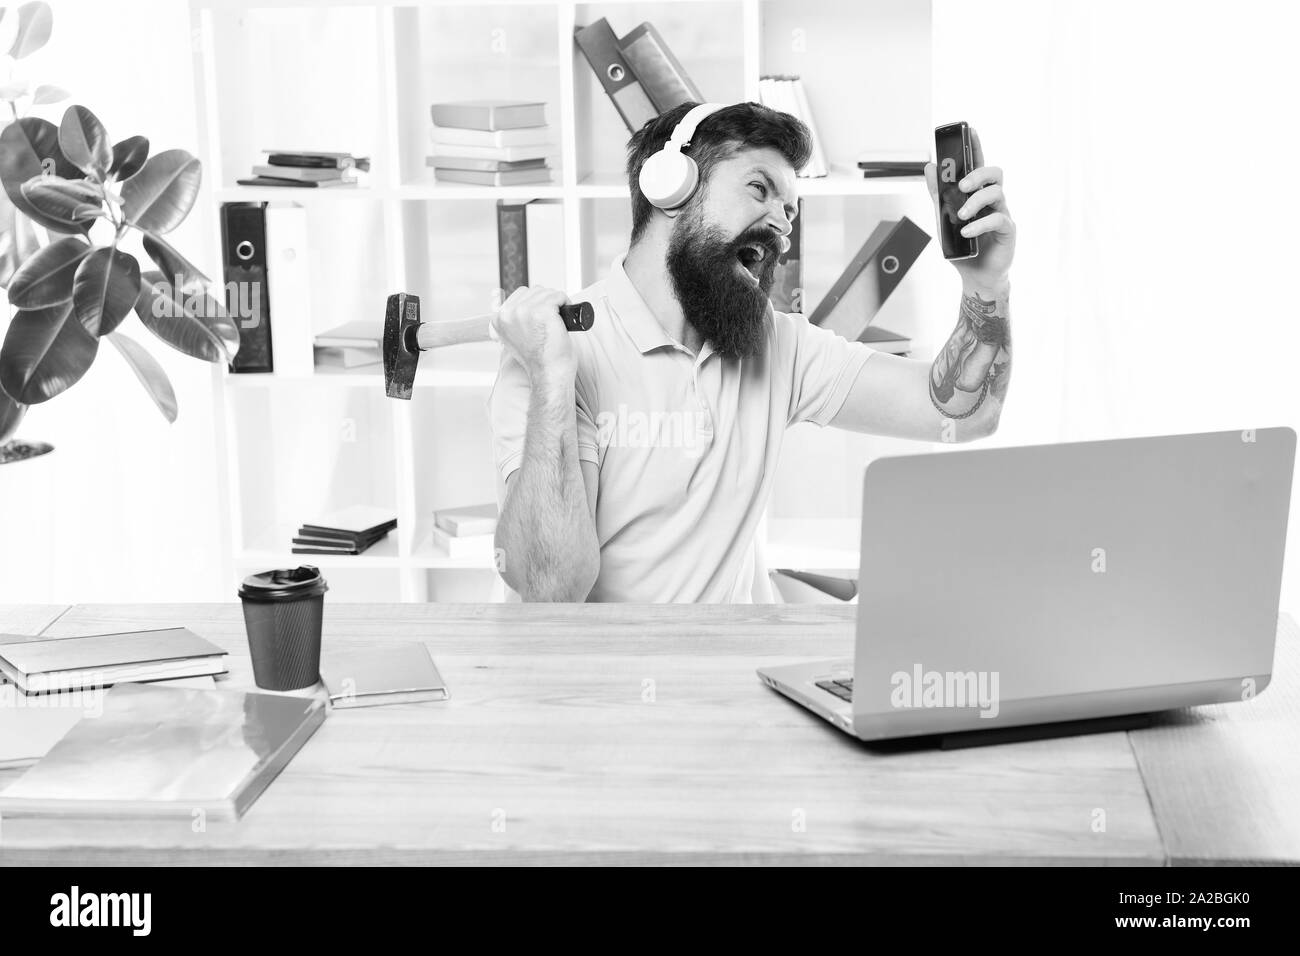 Incoming call. Most annoying thing about work in call center. Annoying client calling. Man bearded guy headphones office swing hammer on smartphone. Spoiled communication. Failed mobile negotiations. Stock Photo